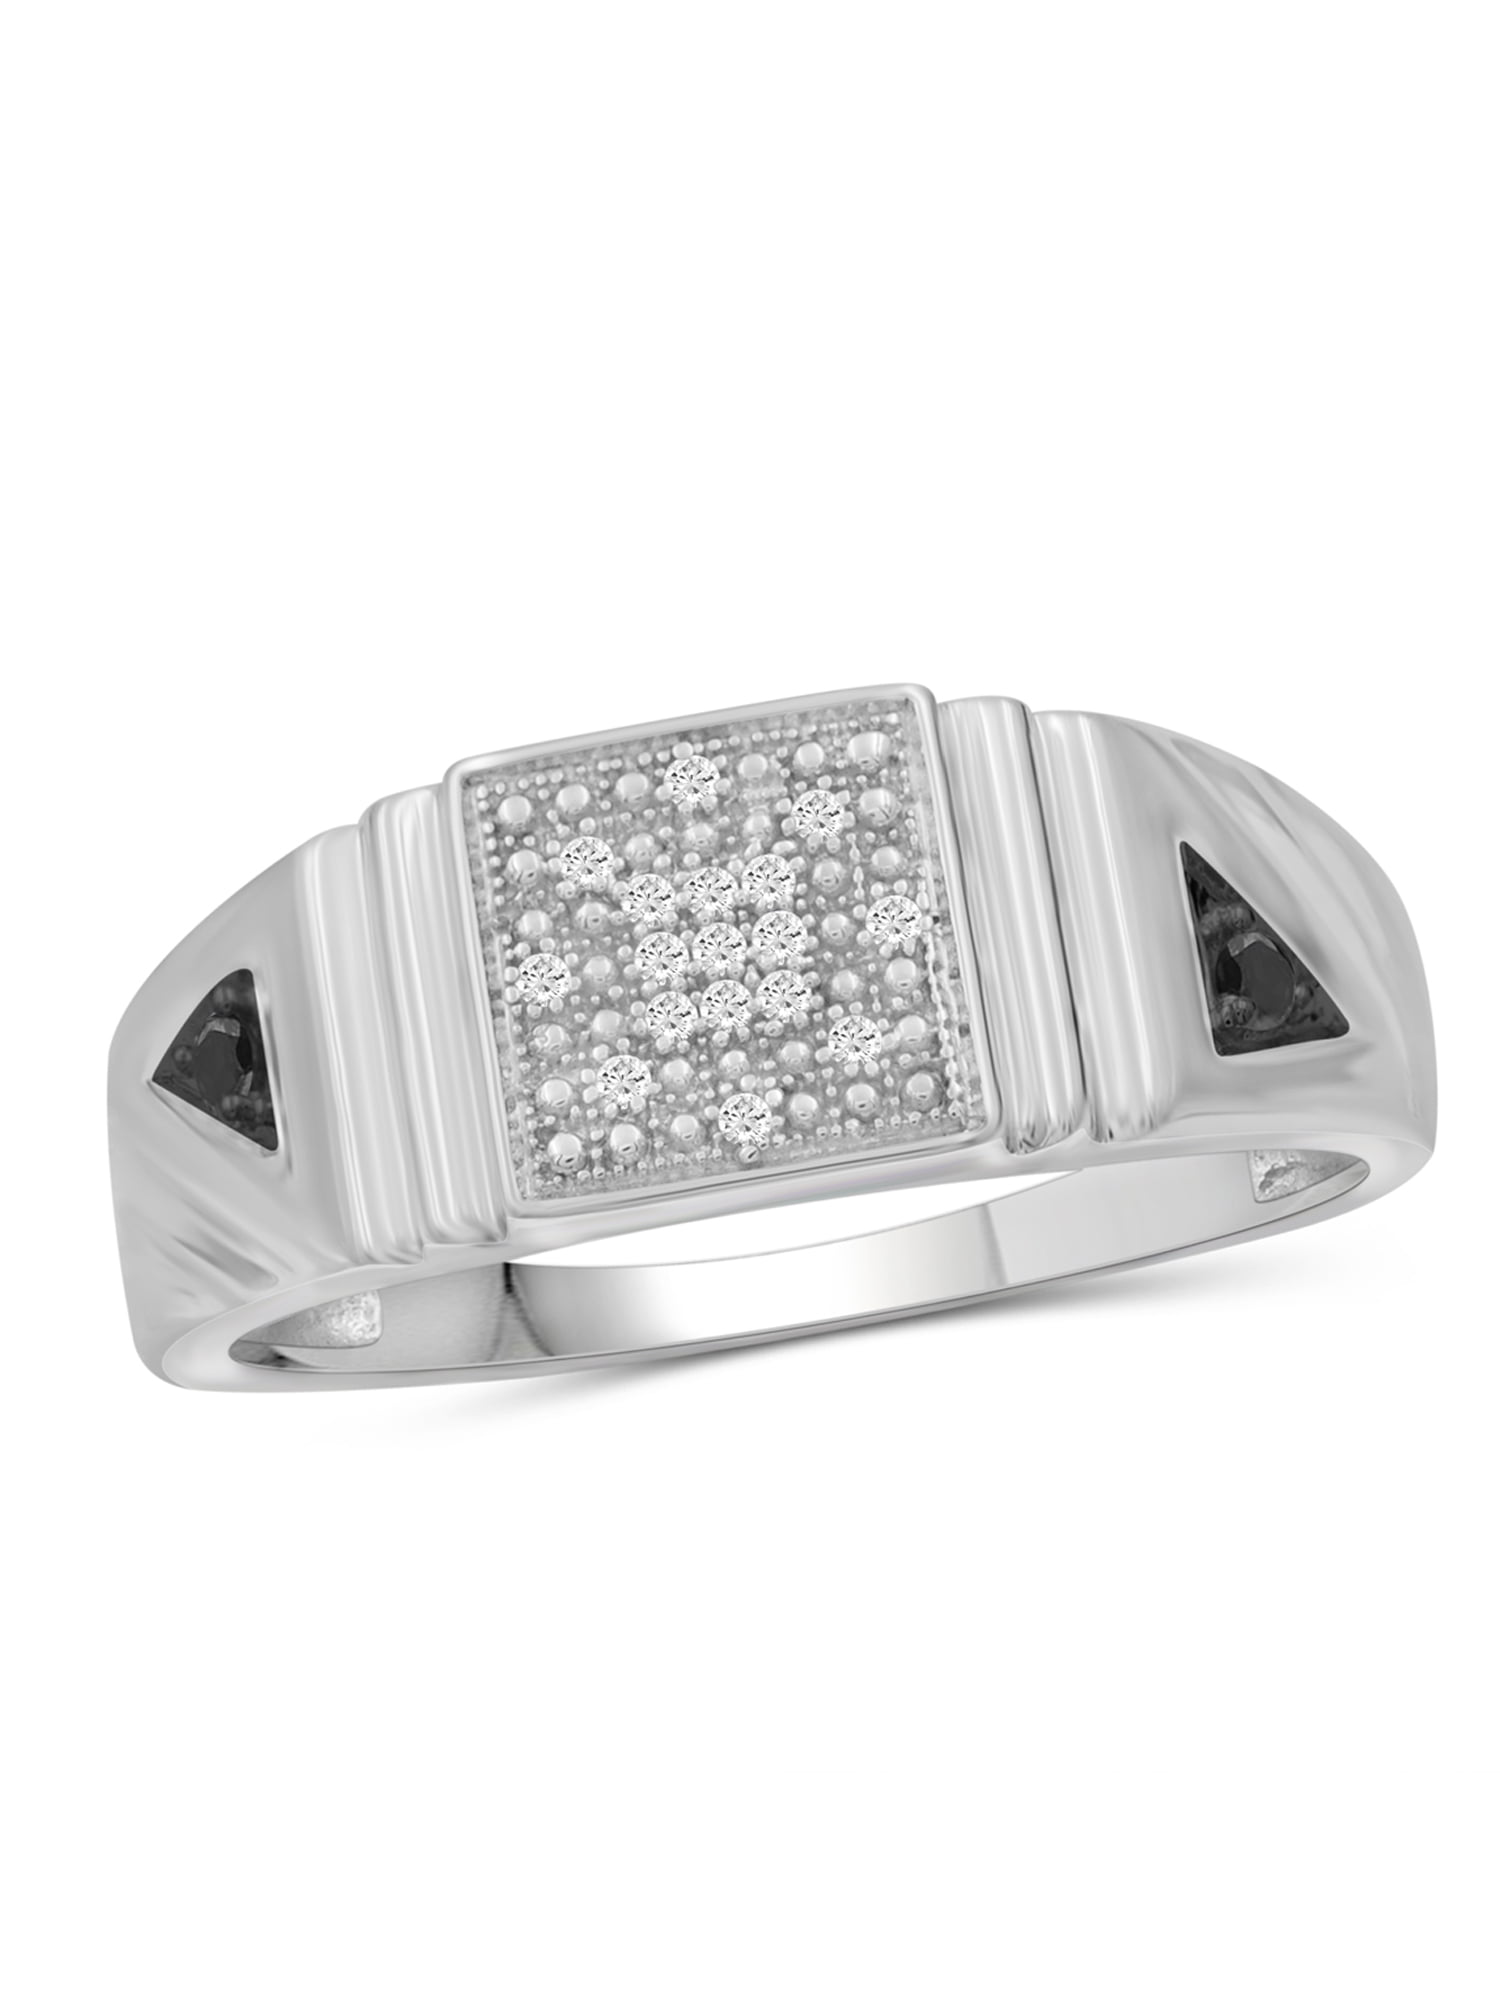 Vintage Hip Hop Mens Silver Diamond Ring With Crystal Rhinestone And Cubic  Zircon For Men Perfect For Weddings And Special Occasions Available In Big  Sizes Dropshipping Available From Vivian5168, $1.37 | DHgate.Com